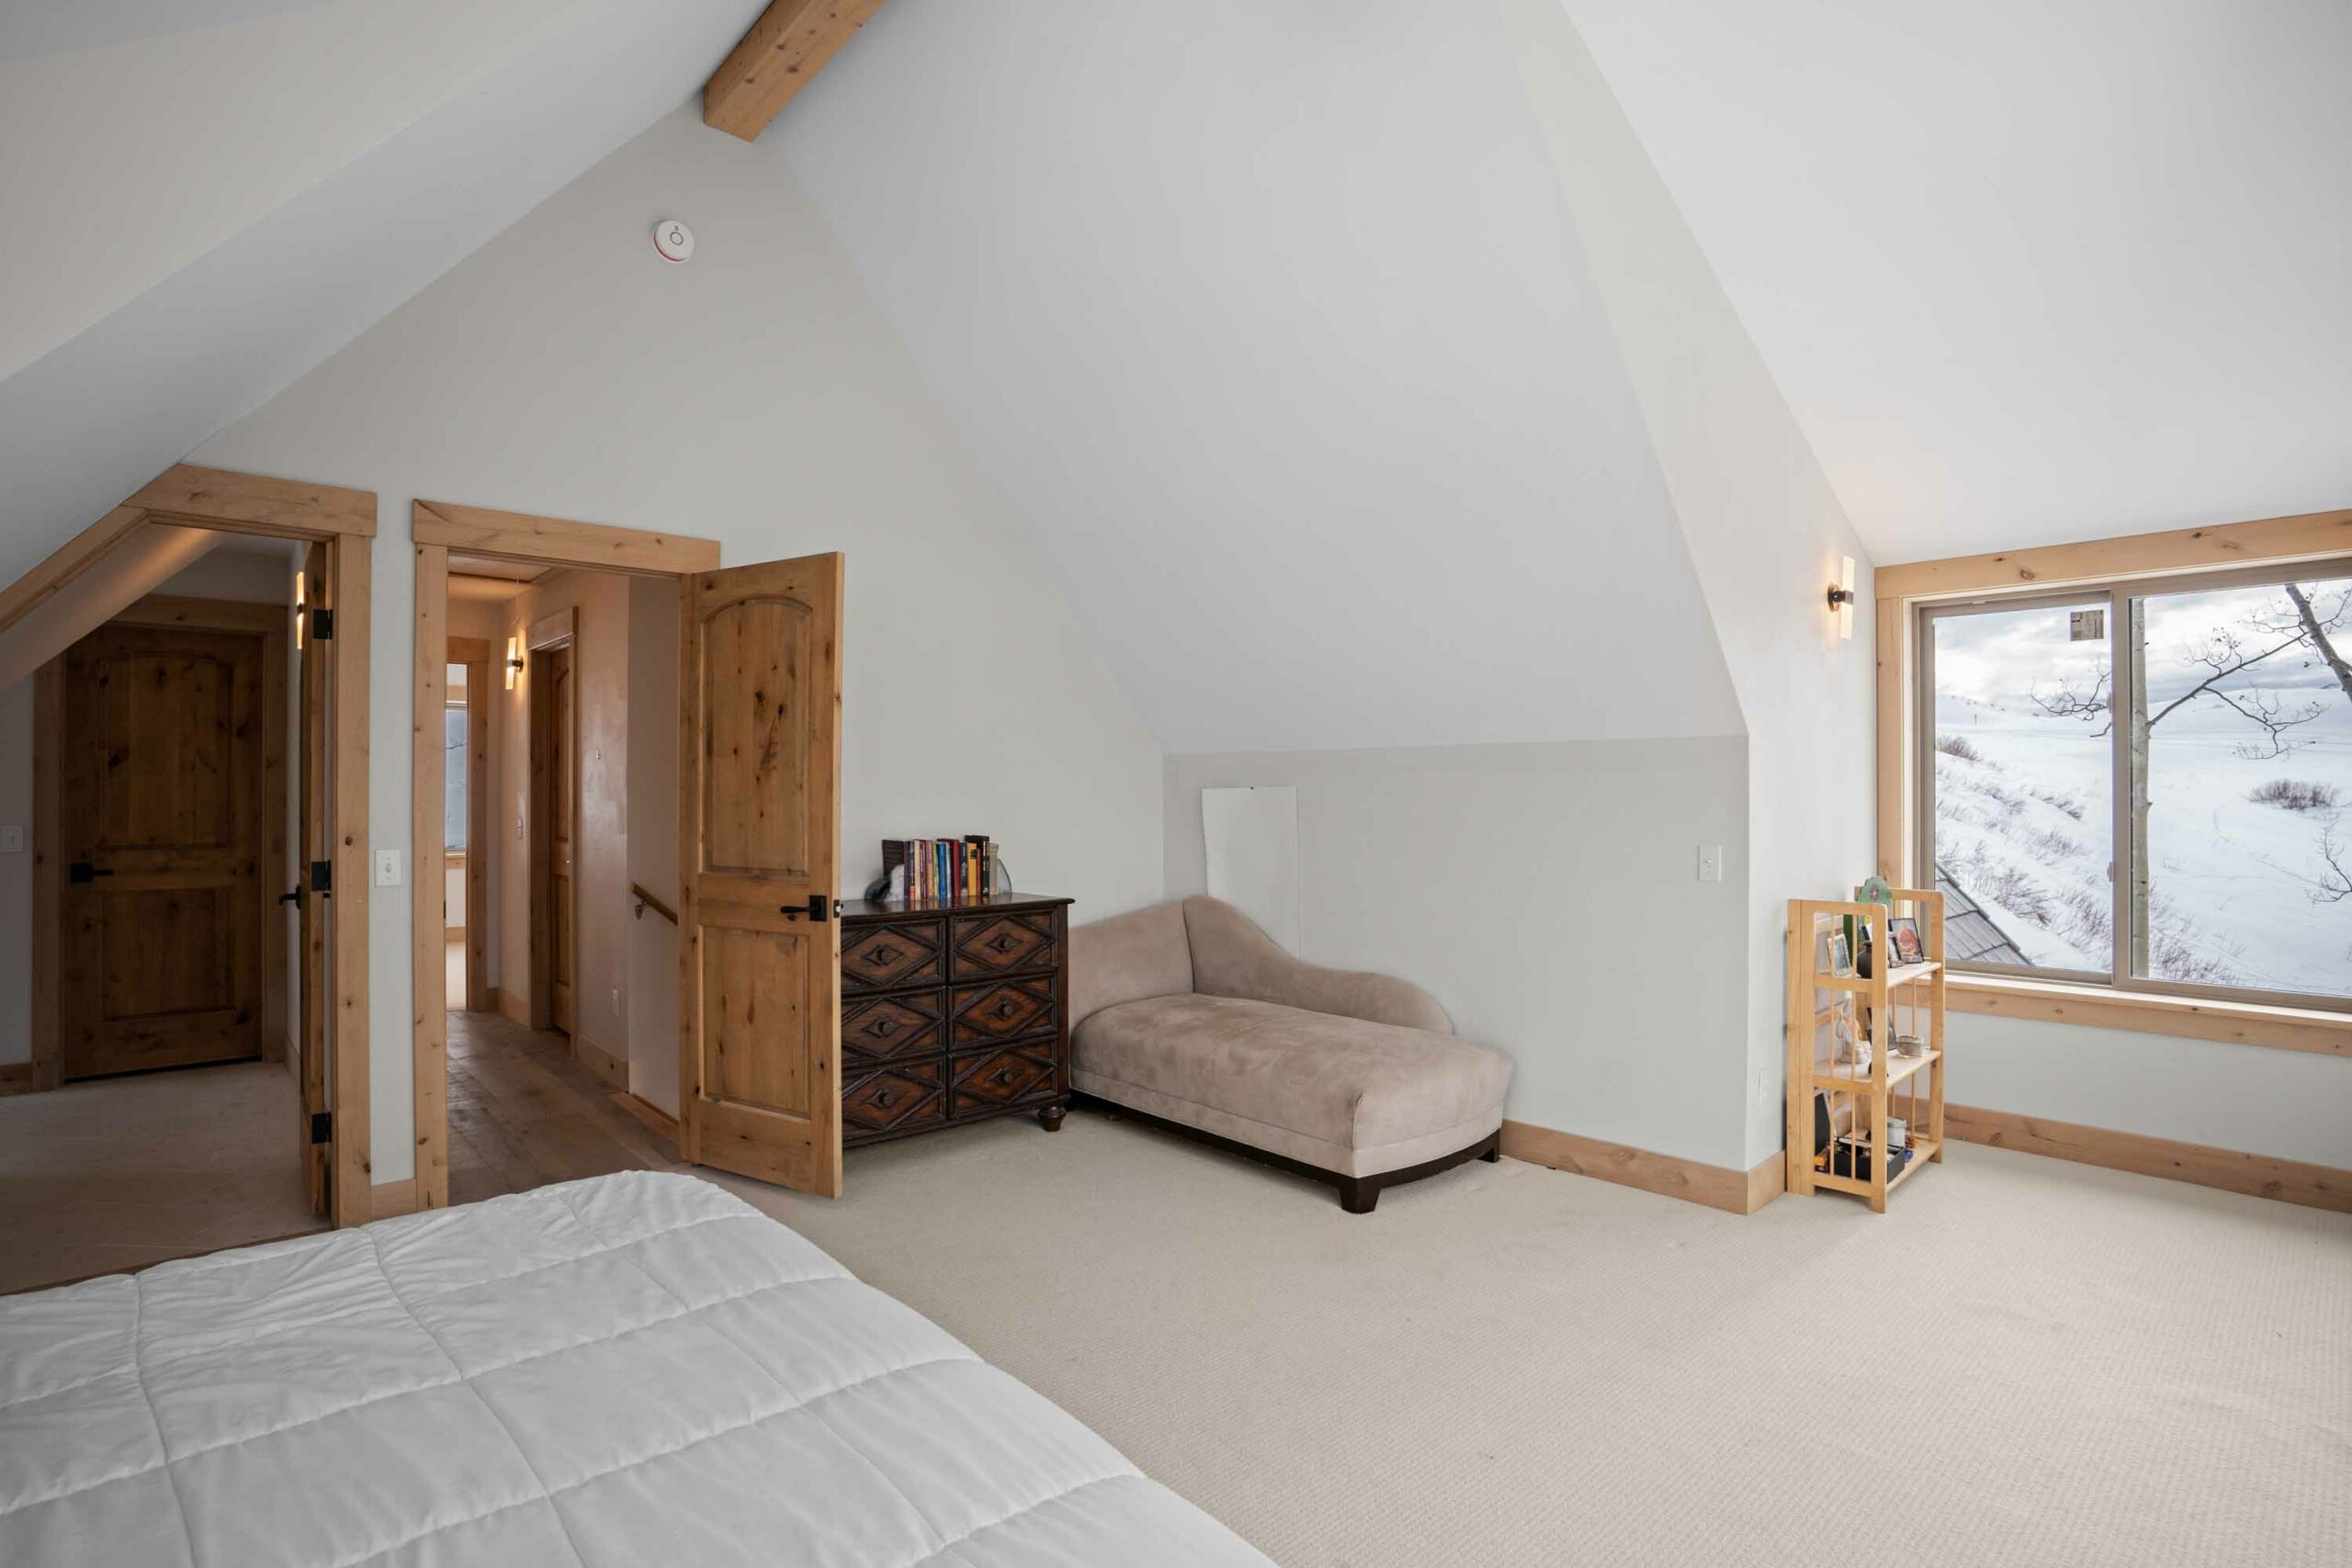 42 Ruby Drive Mt. Crested Butte, Colorado - primary bedroom